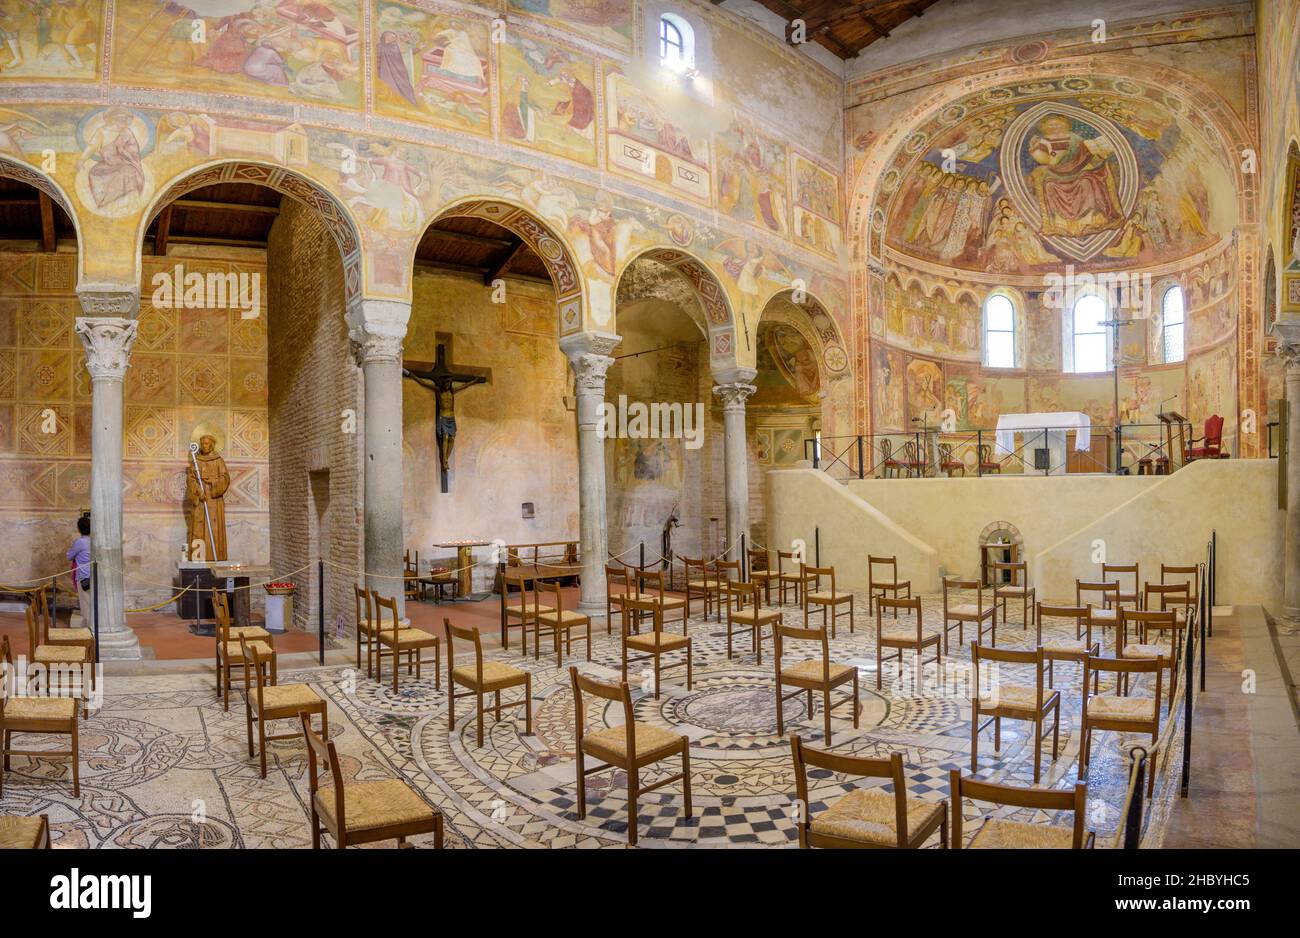 Floor mosaics from around 1150 and magnificent frescoes from the 14th century in the abbey church of Pomposa, Codigoro, province of Ferrara, Italy Stock Photo